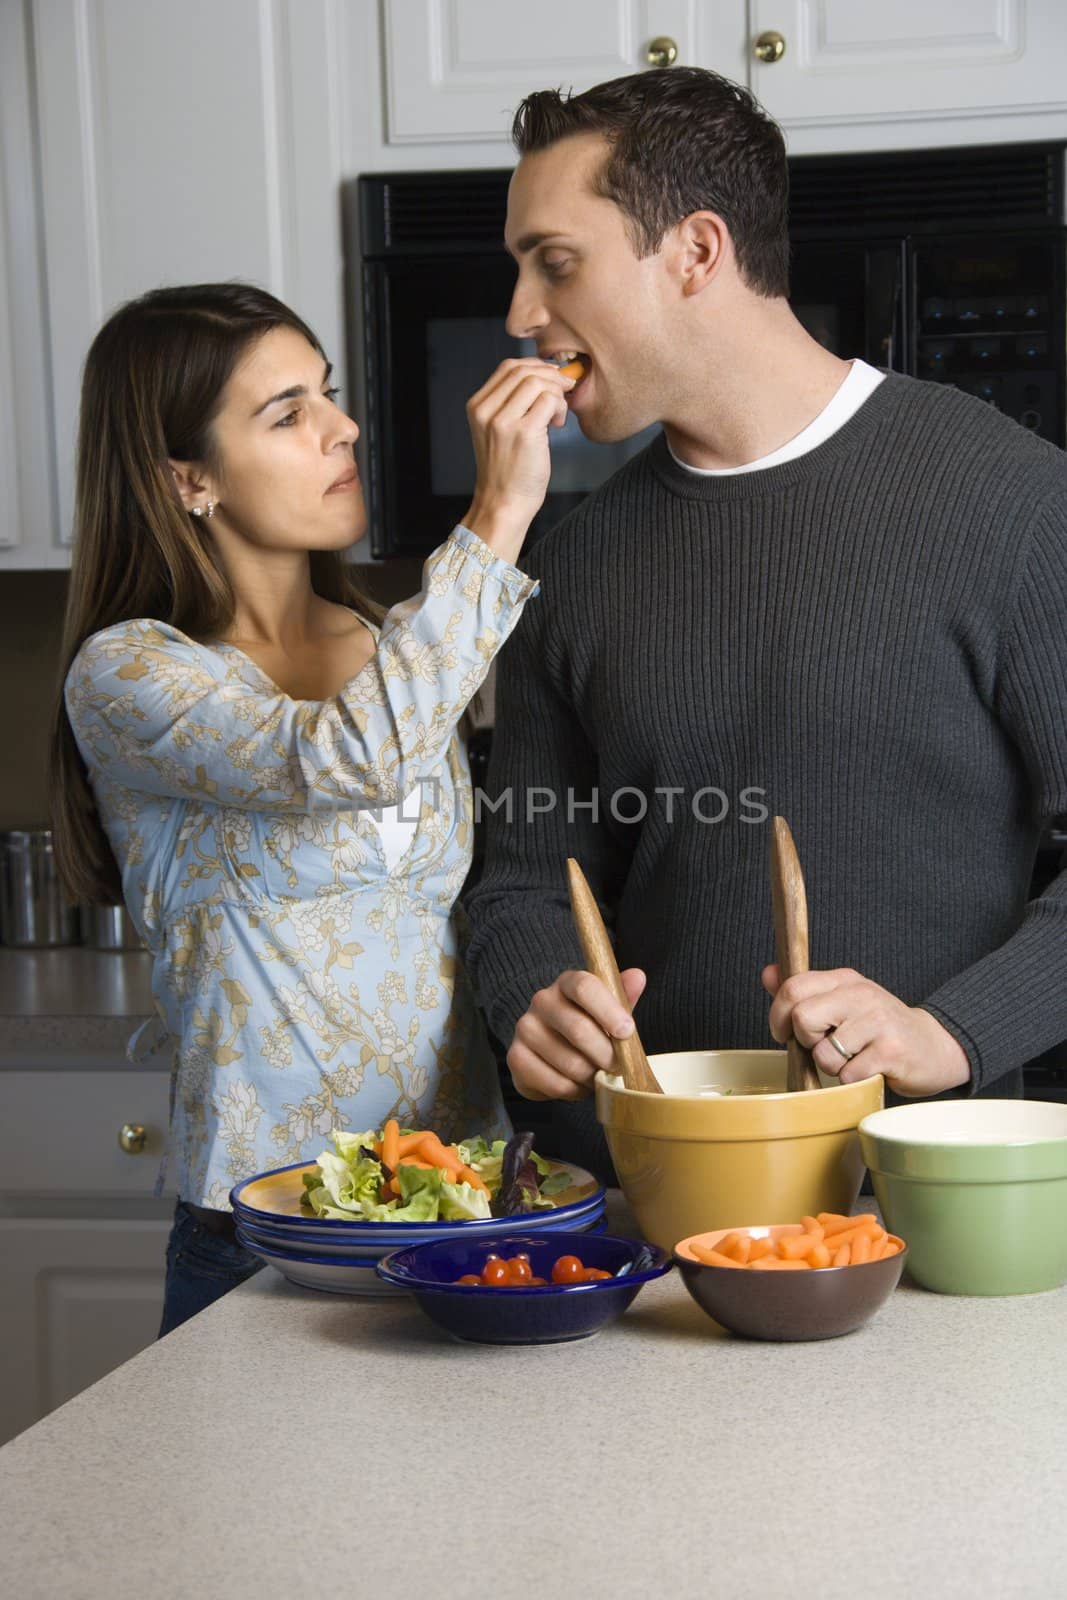 Caucasian woman feeding man at kitchen counter while he makes salad.